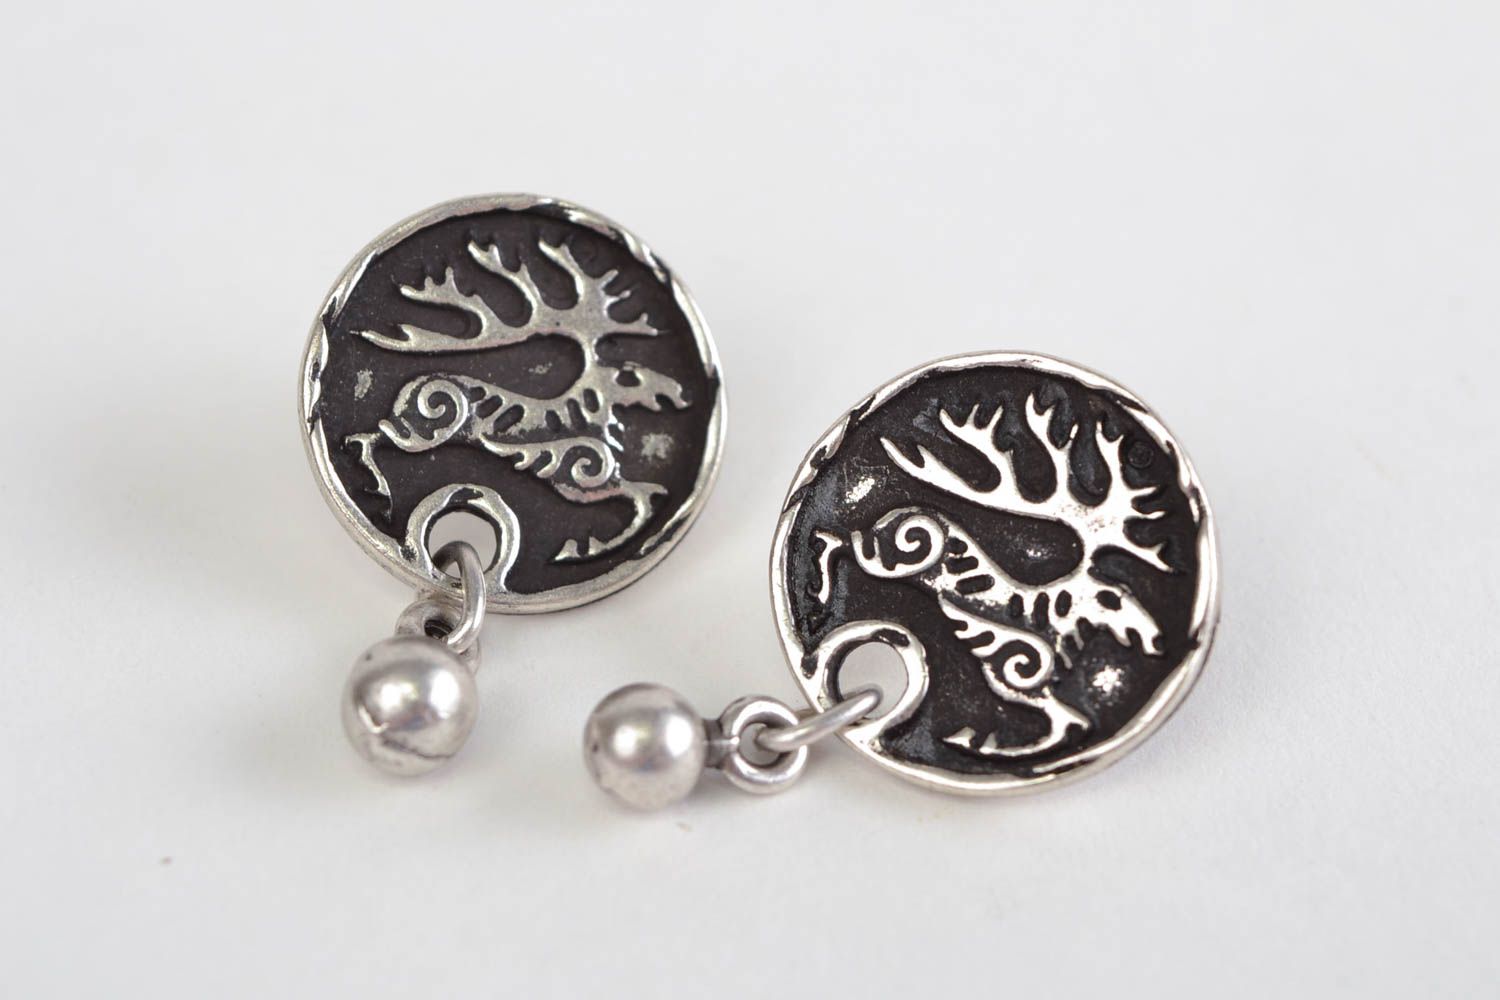 Handmade small round stud earrings cast of hypoallergenic metal with deer image photo 4